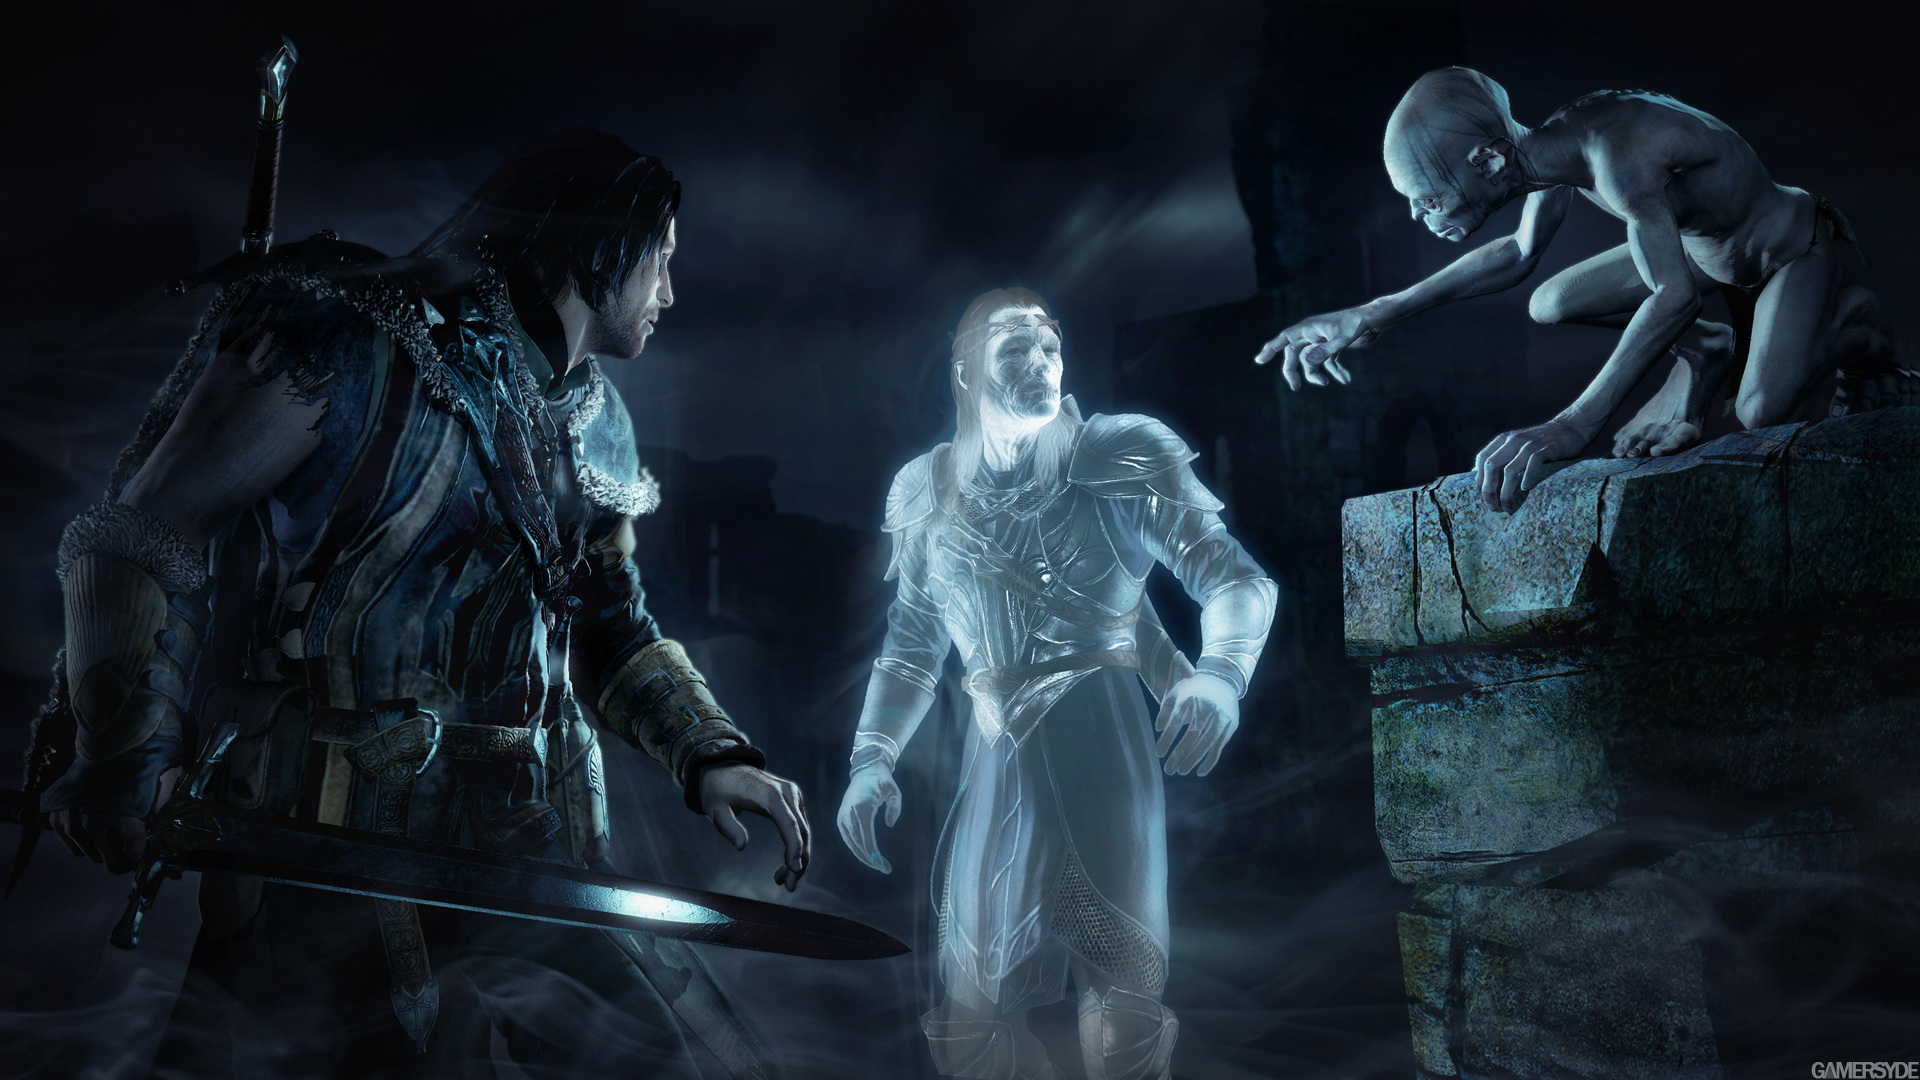 Middle-earth: Shadow of Mordor - The Spirit of Mordor - Achievement / Trophy  Guide - 4k HD 